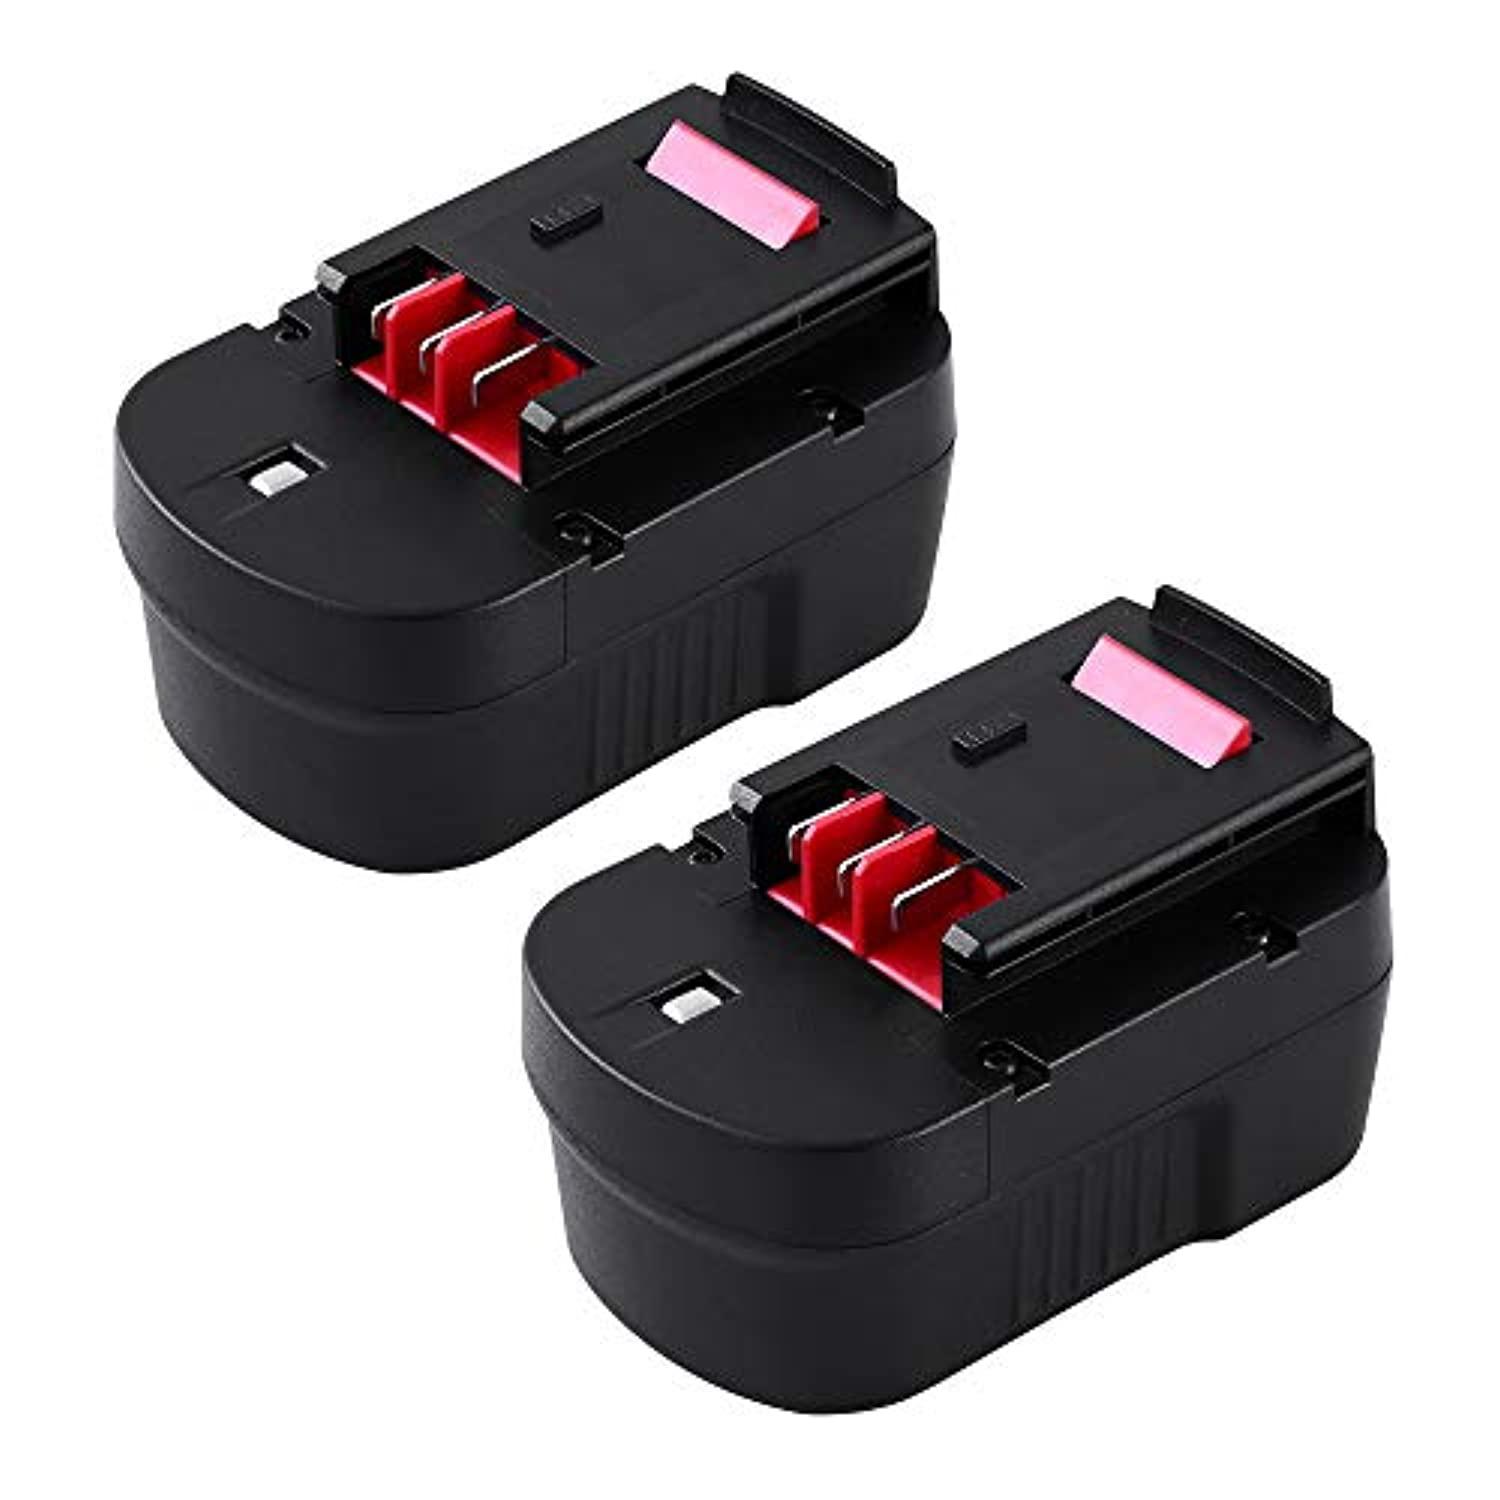 Boetpcr 2 pack 3.6ah hpb14 replacement battery compatible with black and decker 14.4v battery firestorm 499936-34 499936-35 fsb14 a14